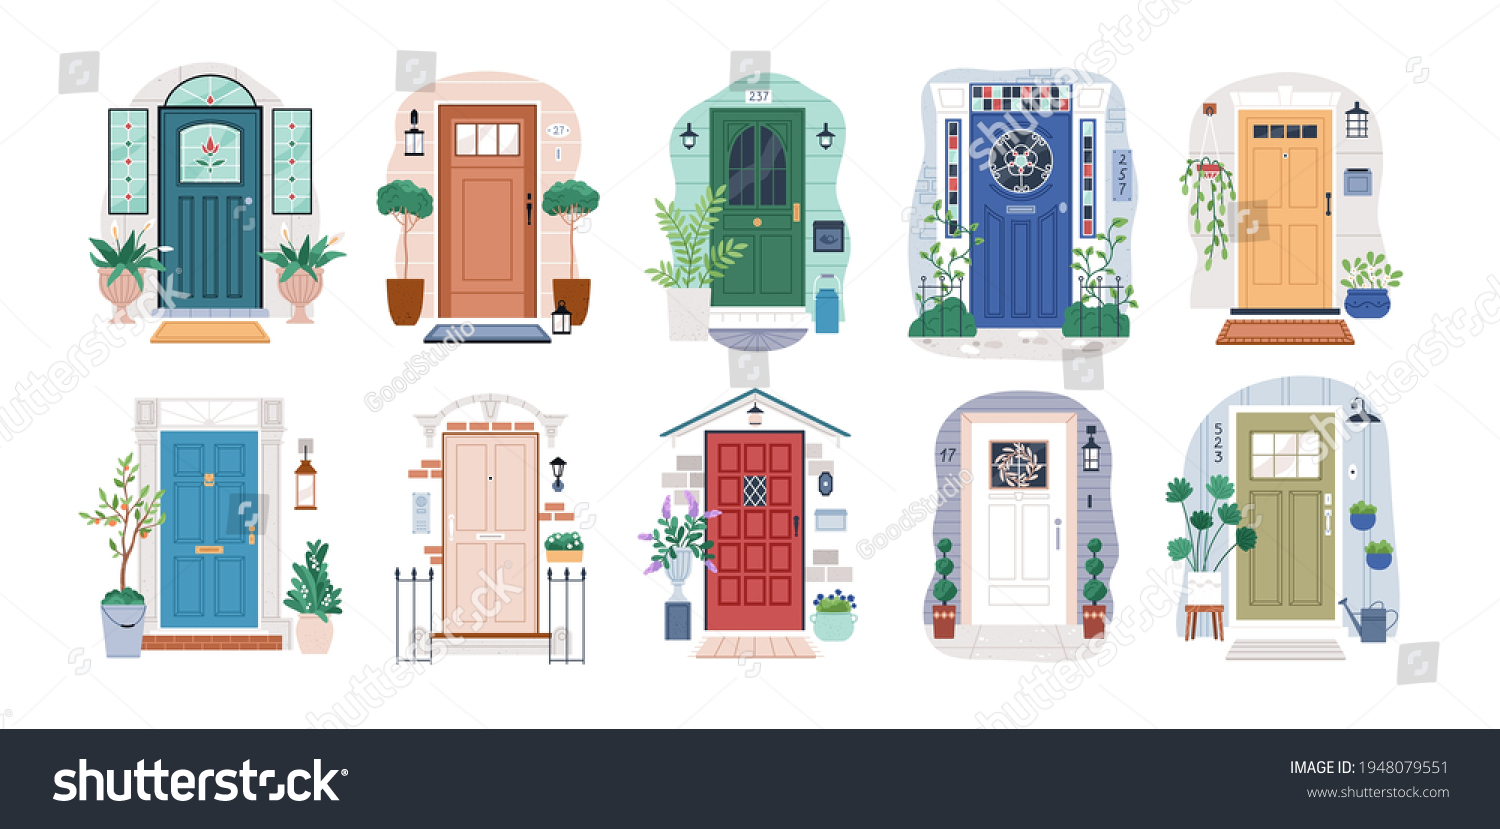 SVG of Set of different house entrances, porches and closed doors. Entries to apartments with potted plants, mats, lamps and letterboxes. Colored flat vector illustration isolated on white background svg